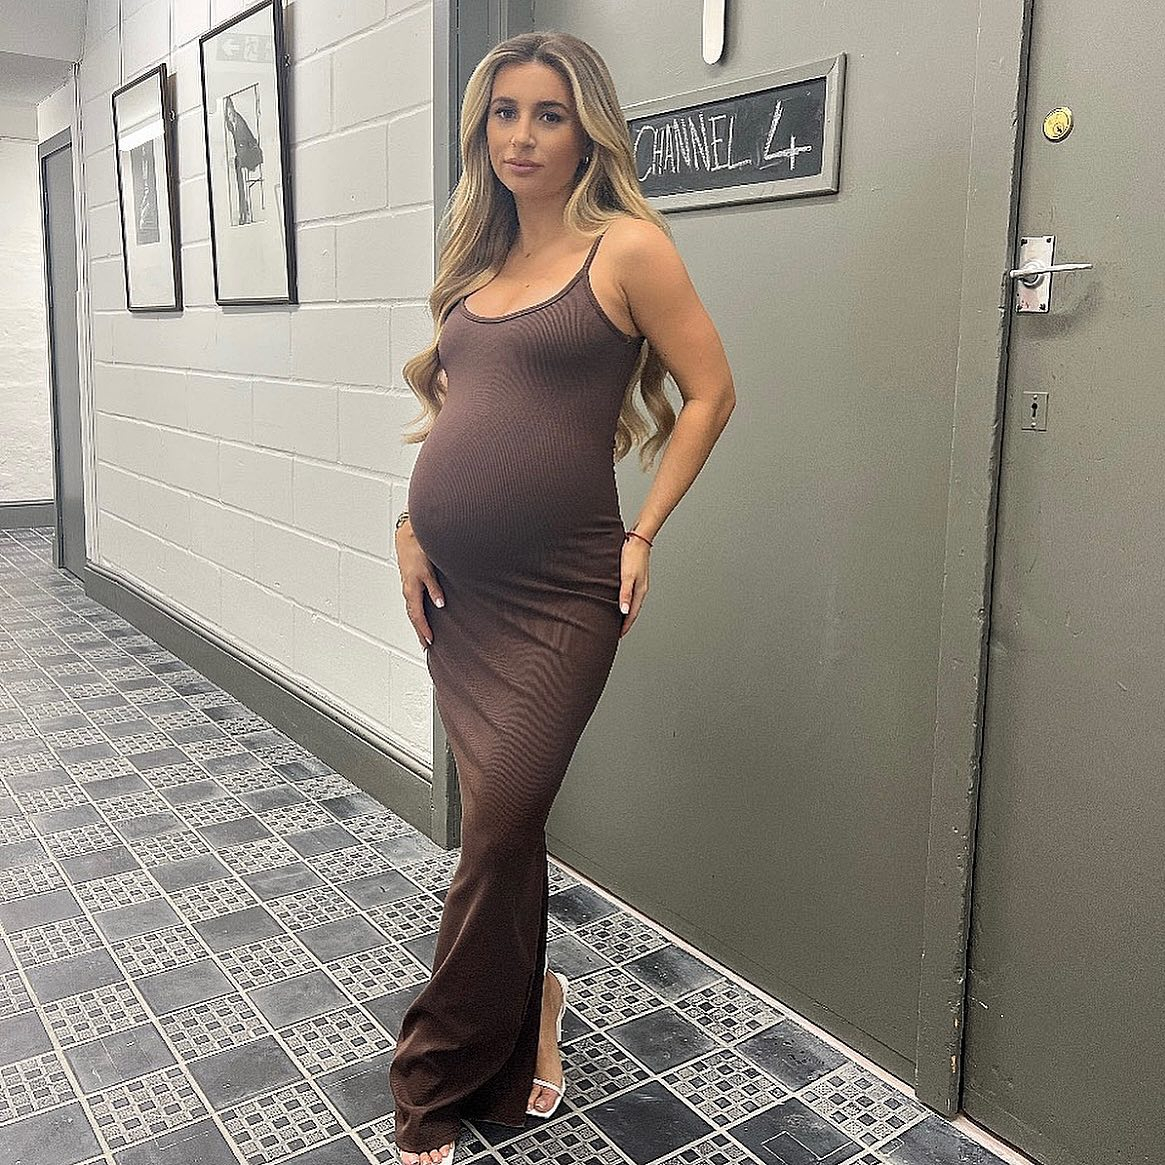 Pregnant Dani Dyer shows off her growing baby bump in figure-hugging dress as she nears due date